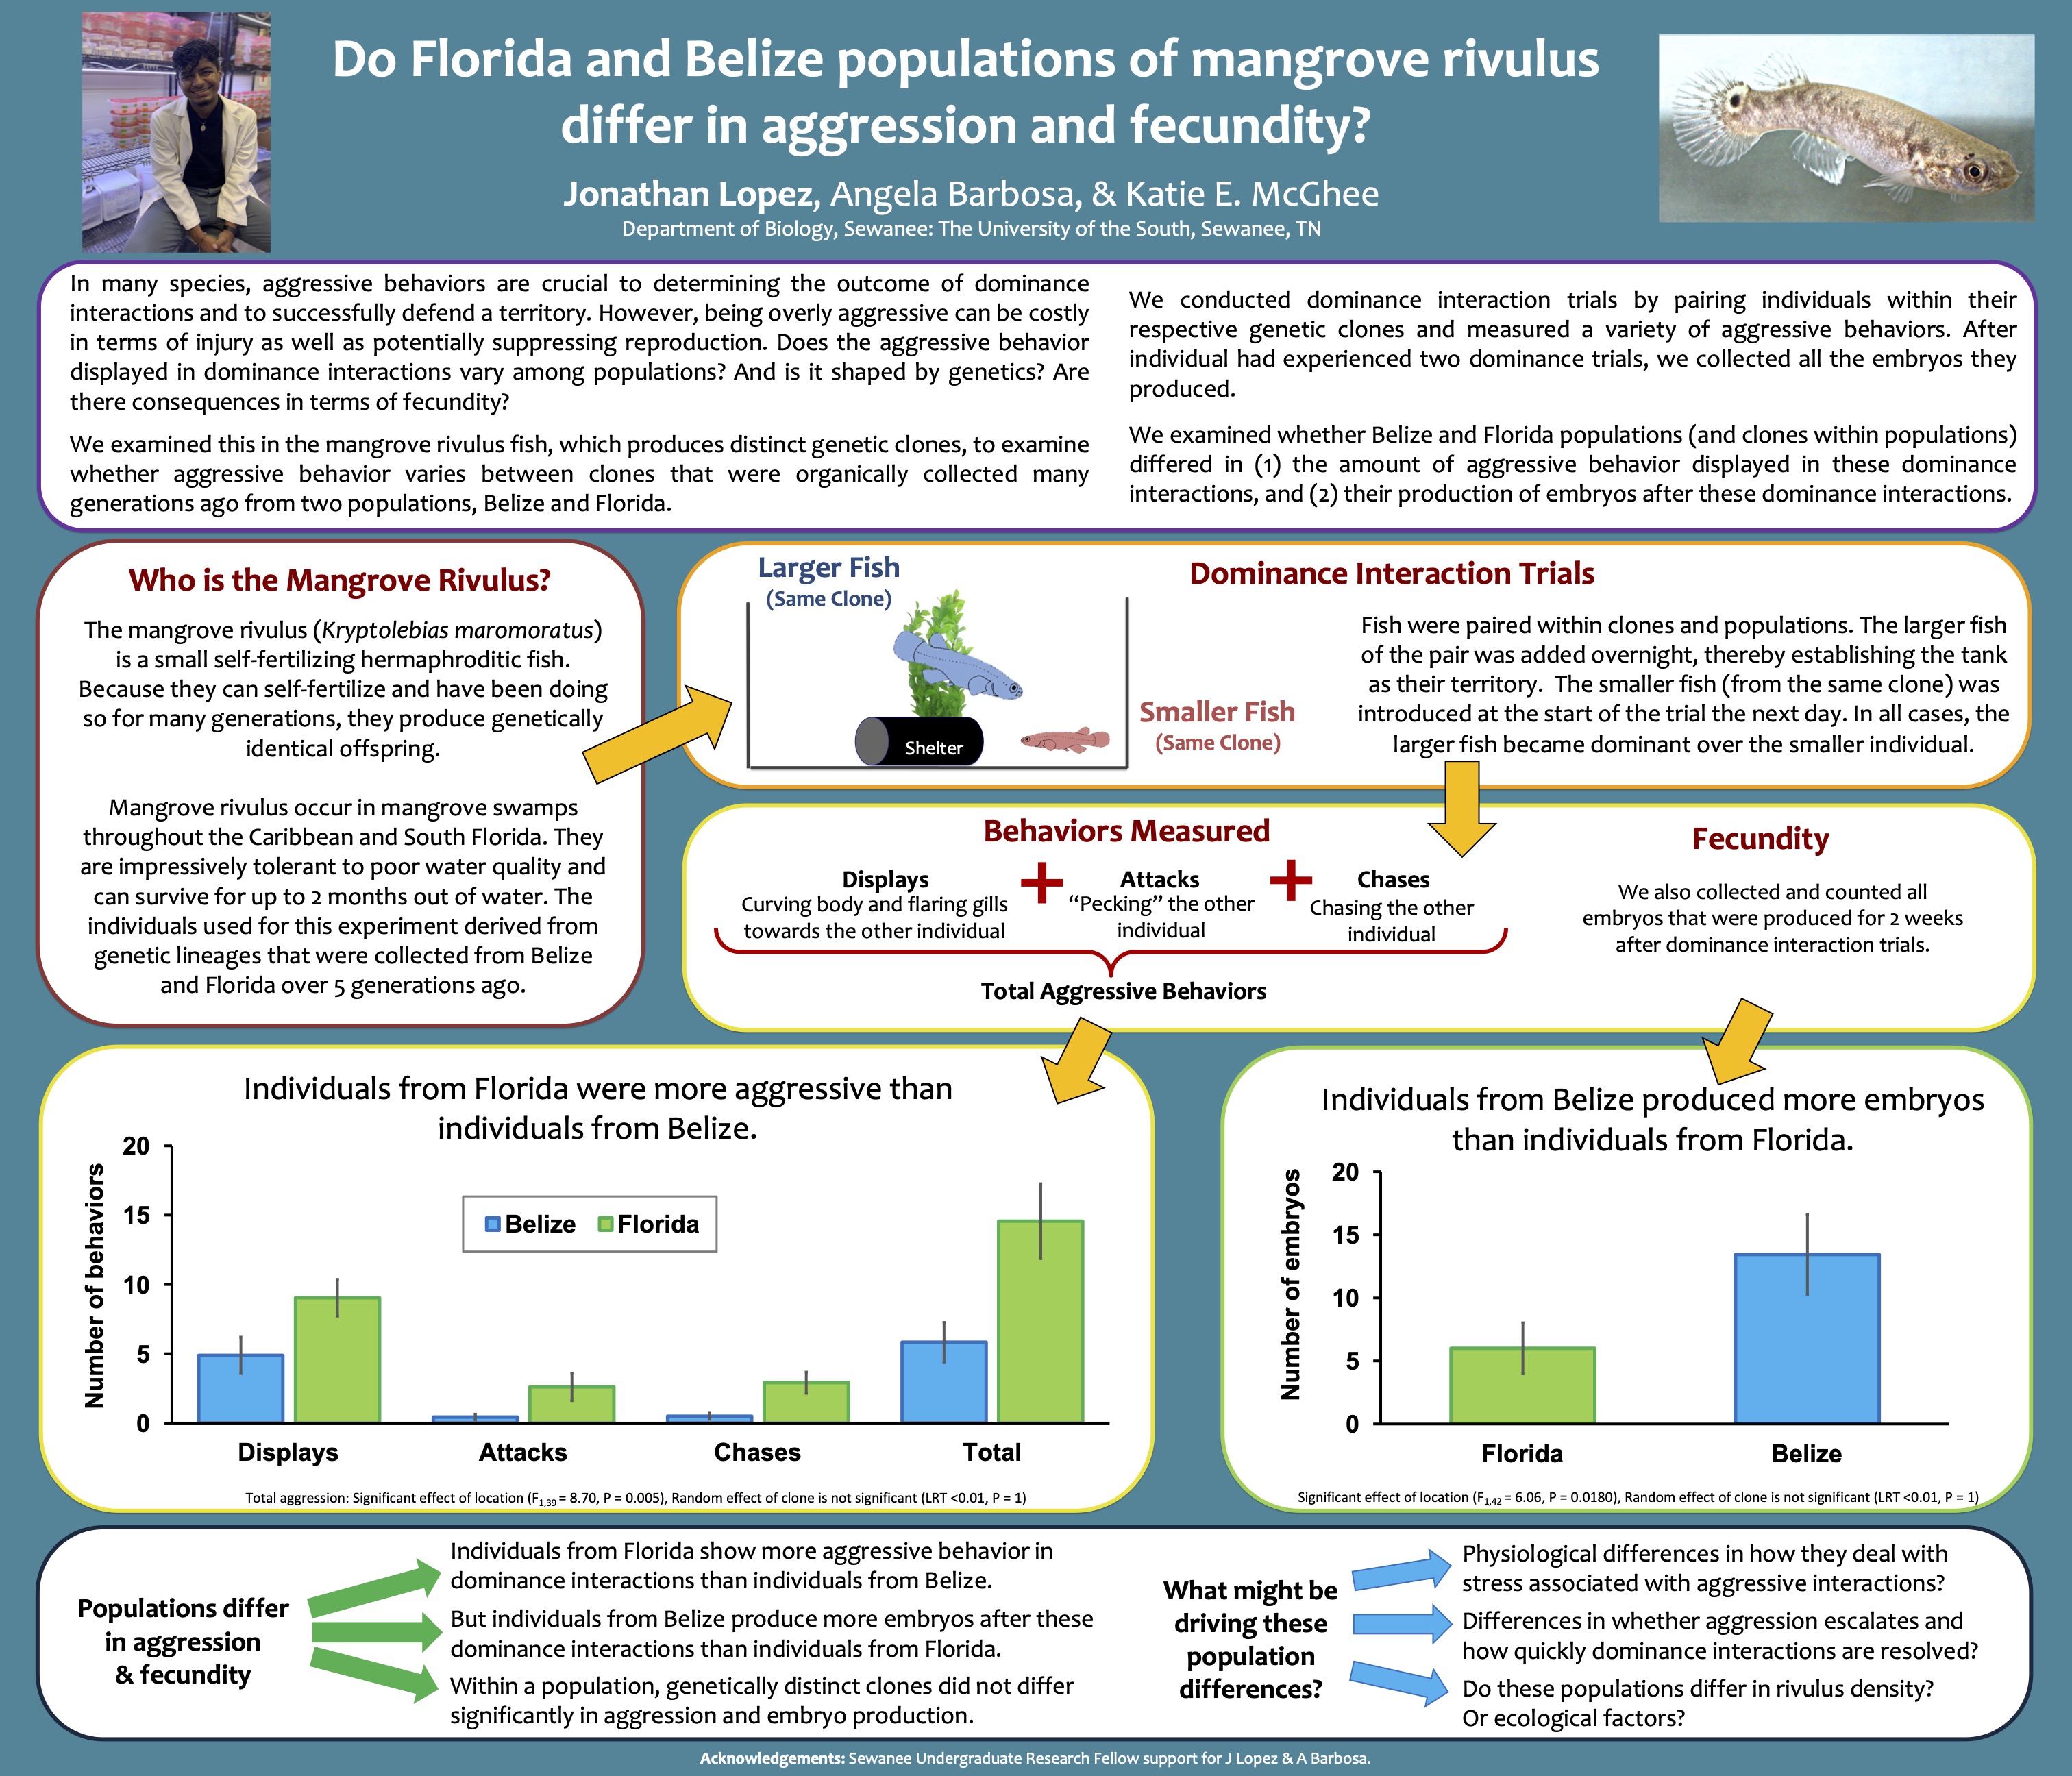 Showcase Image for Do Florida and Belize populations of mangrove rivulus differ in aggression and fecundity?